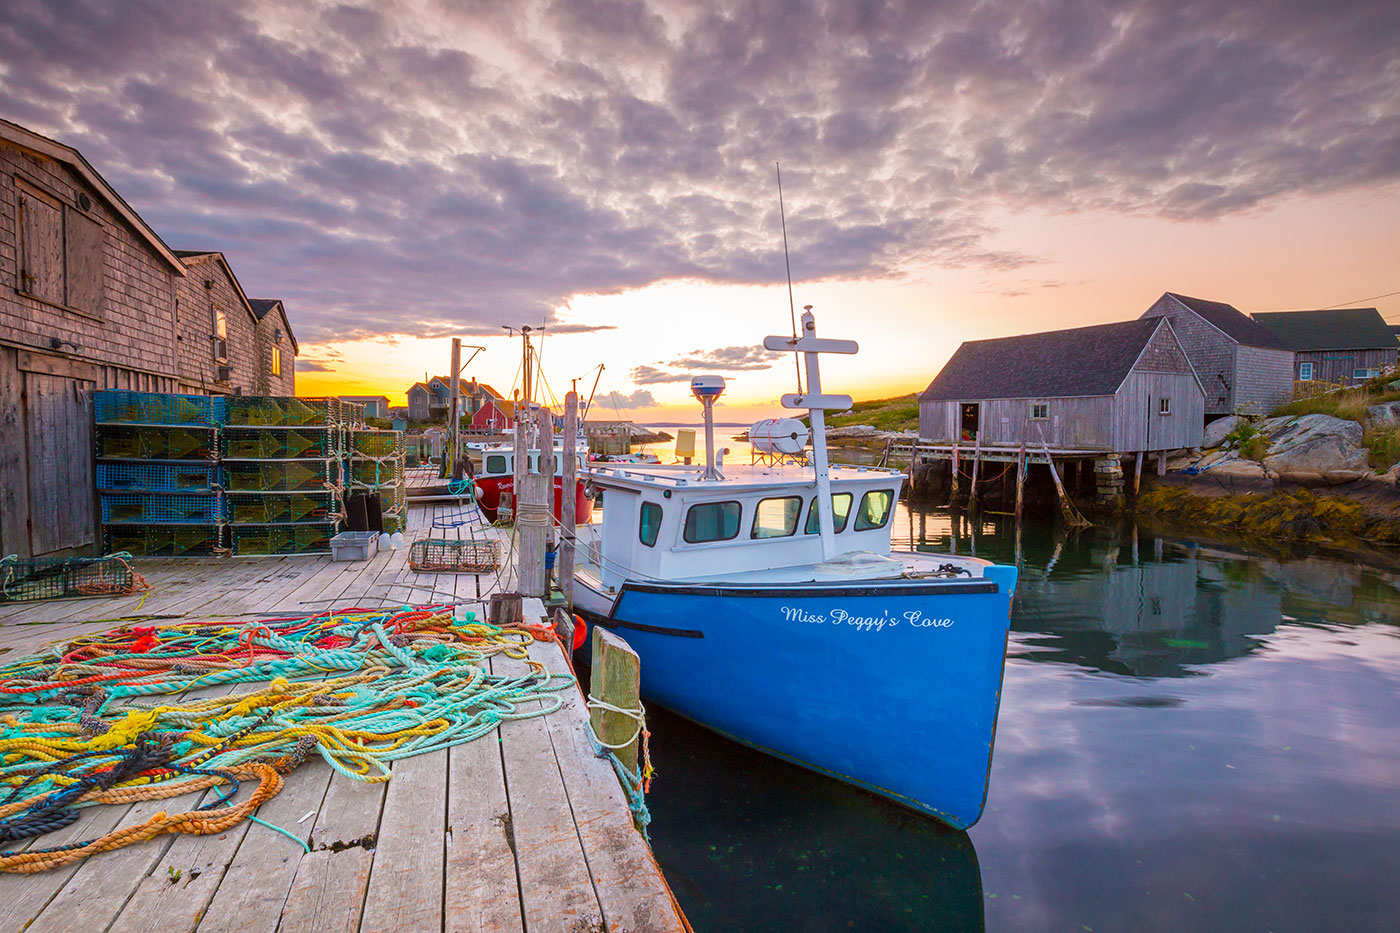 Miss Peggy, fishing boat, docked at Peggys Cove.